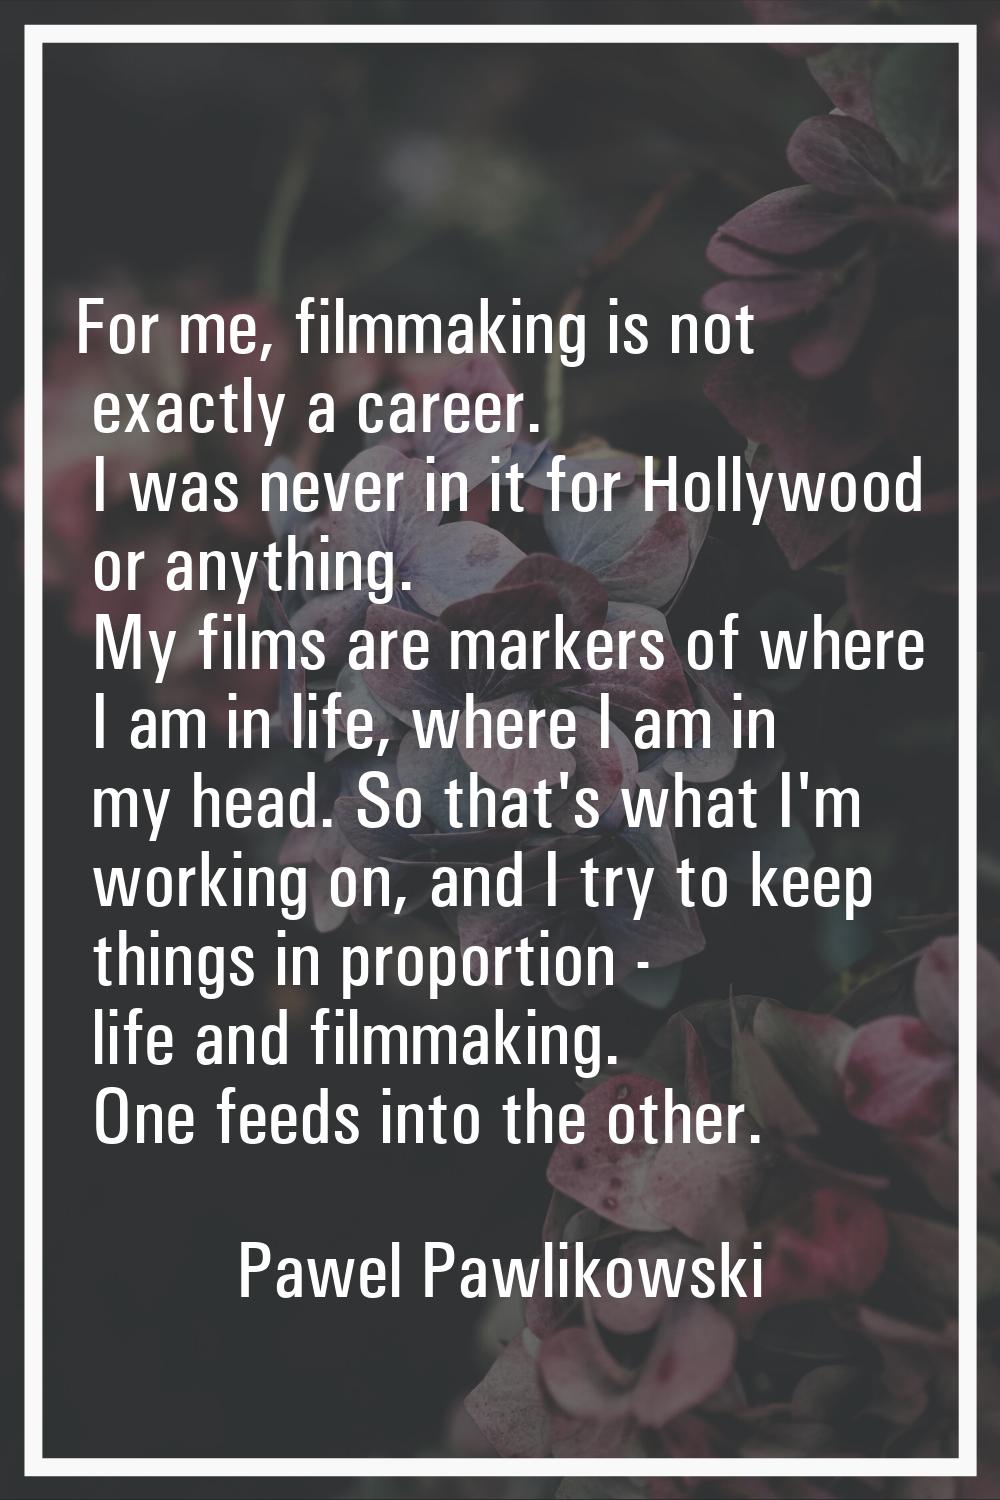 For me, filmmaking is not exactly a career. I was never in it for Hollywood or anything. My films a